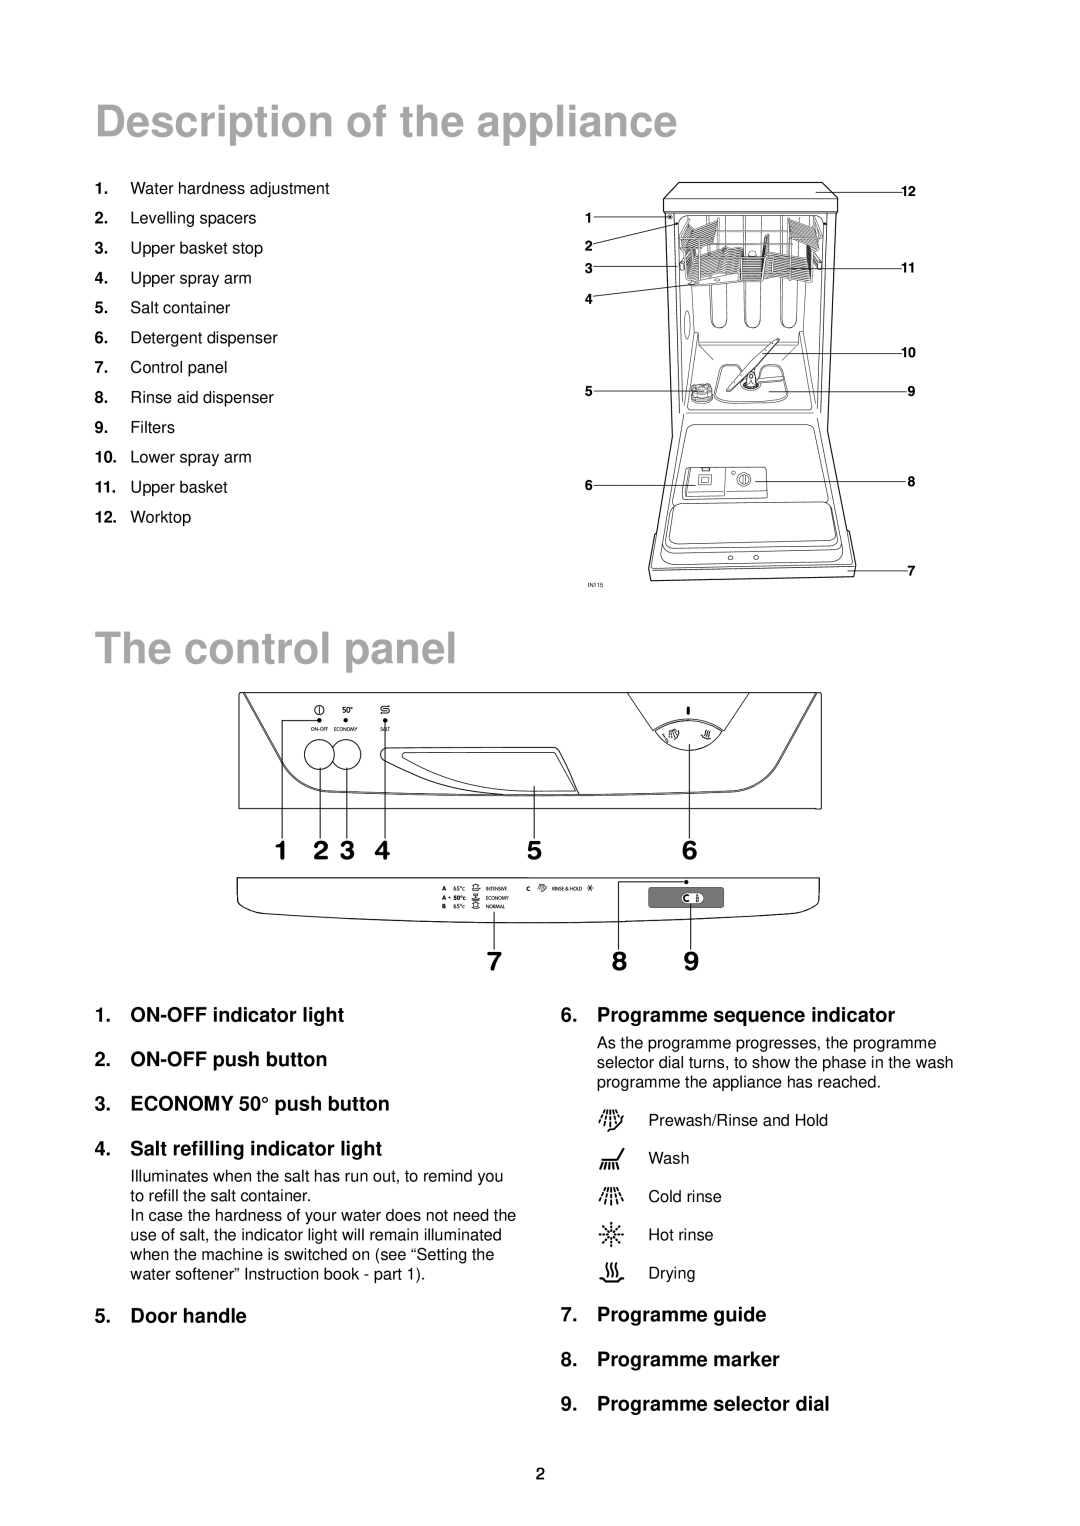 Zanussi DA 4342 Description of the appliance, The control panel, ON-OFF indicator light 2. ON-OFF push button, Door handle 